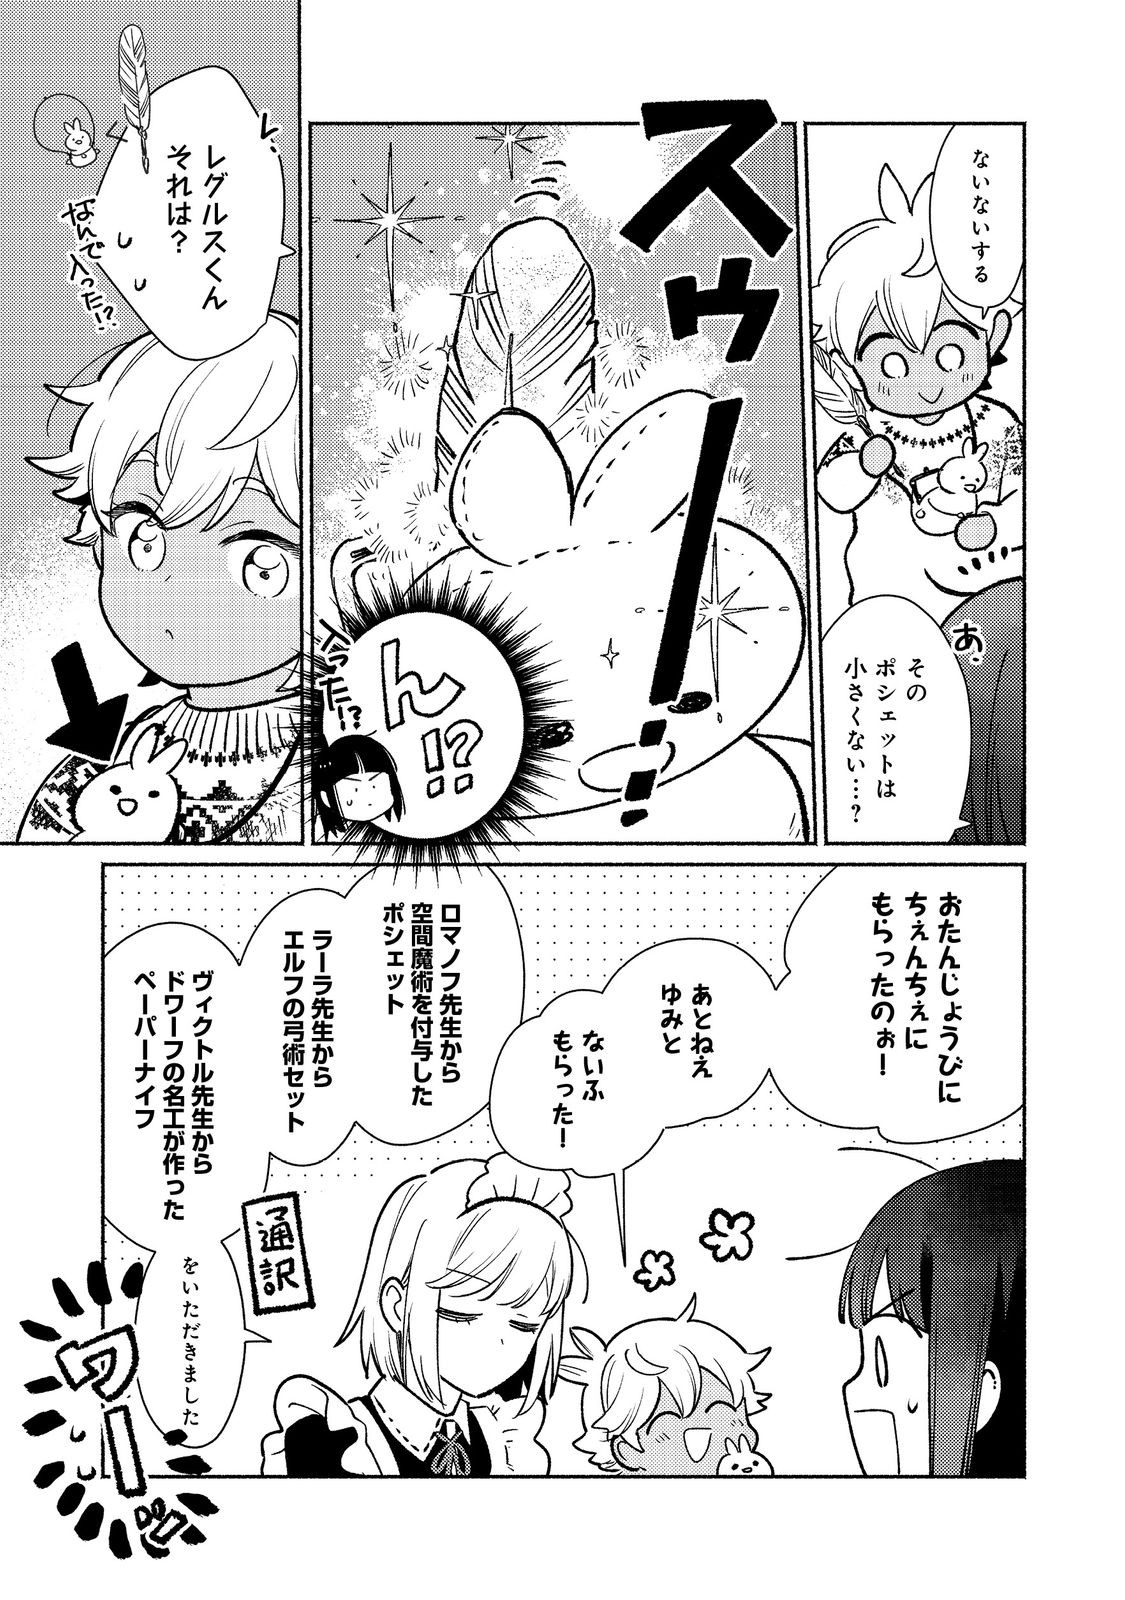 I’m the White Pig Nobleman 第27.1話 - Page 9